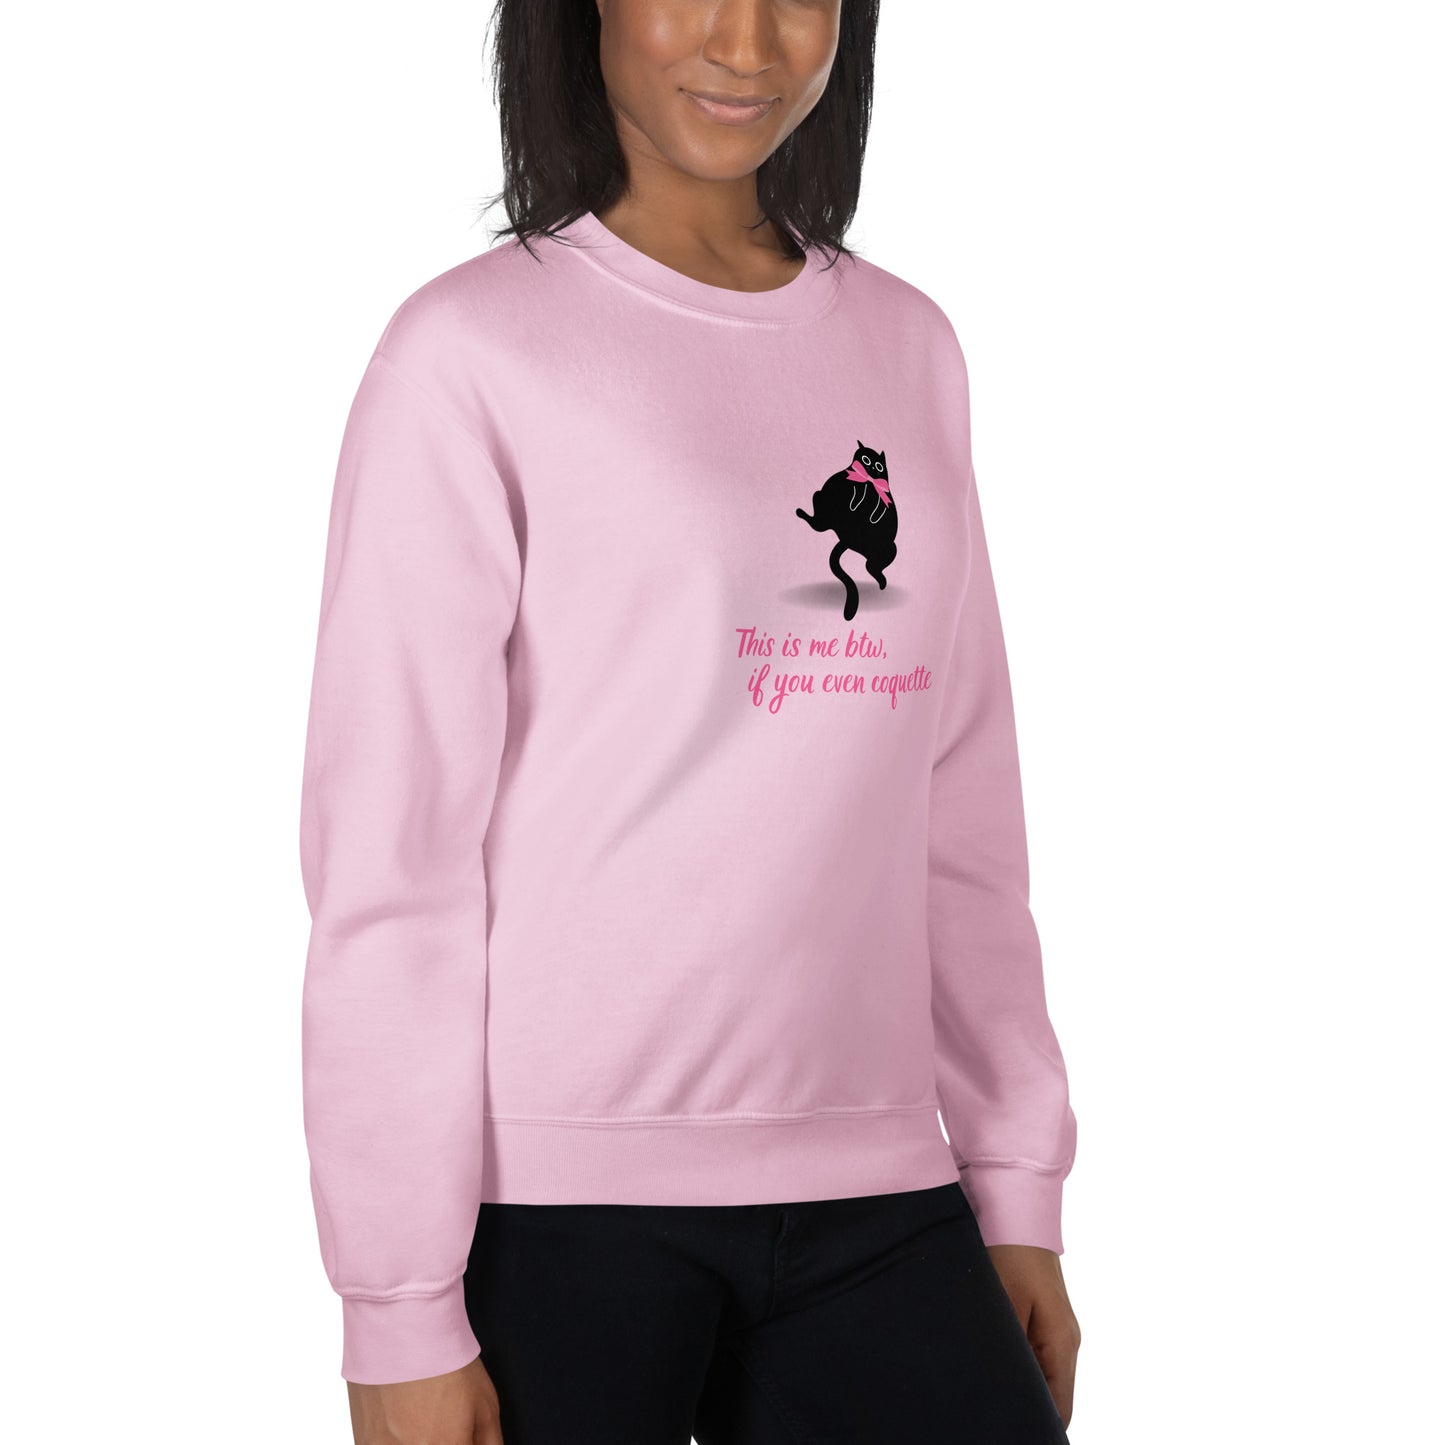 Coquette Sweatshirt, This Is Me Btw, If You Even Care/Coquette Meme, Pink Bow Black Cat, Coquette Aesthetic